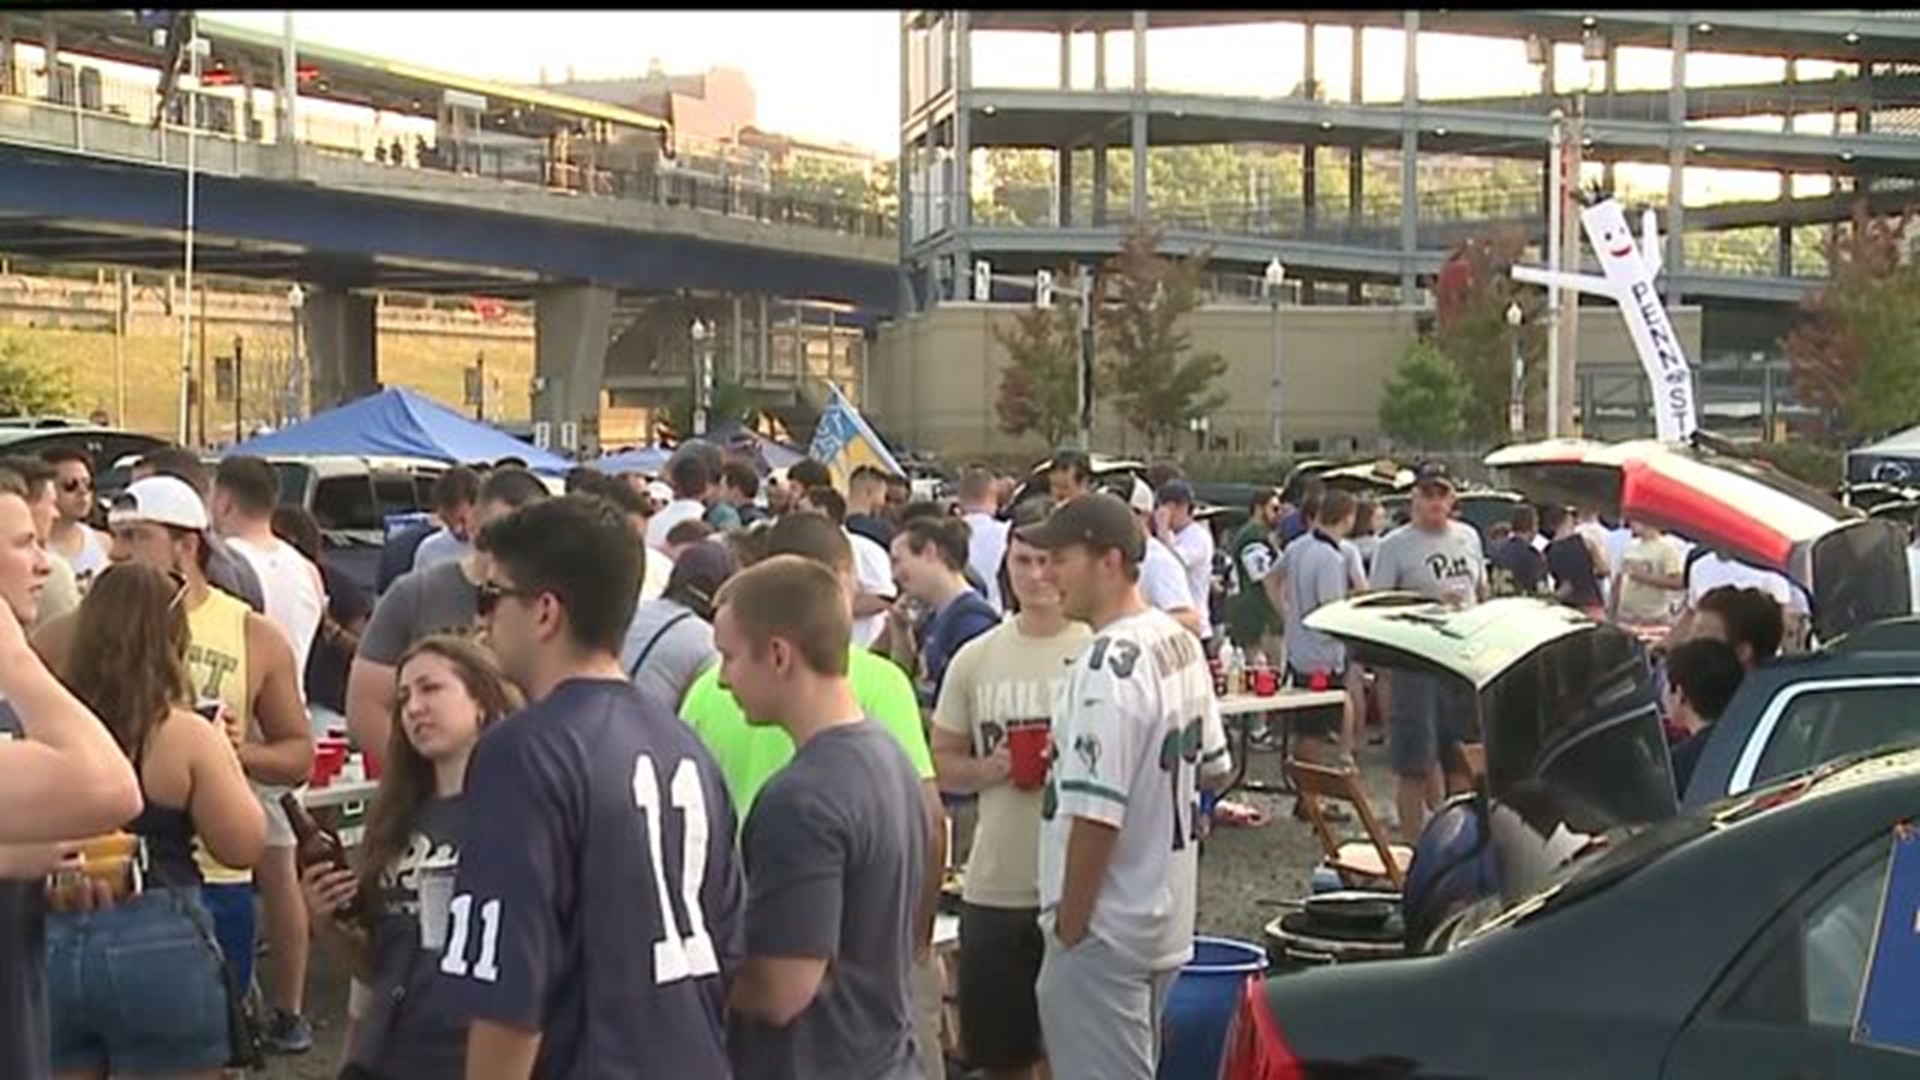 Record number of fans show up for Pitt-Penn State game